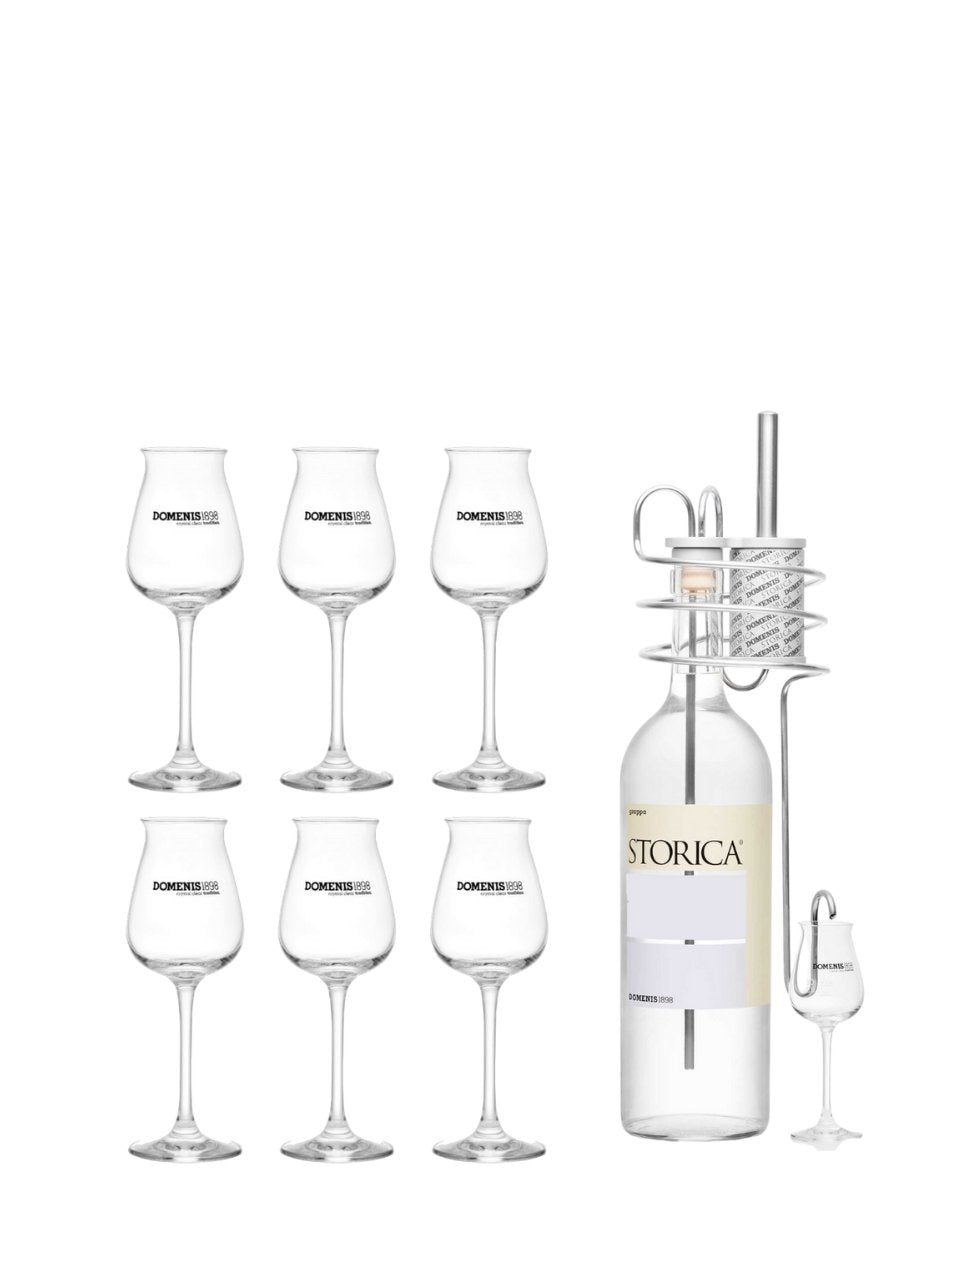 Grappatore with Domenis Grappa Glasses (Bottle Not Included)